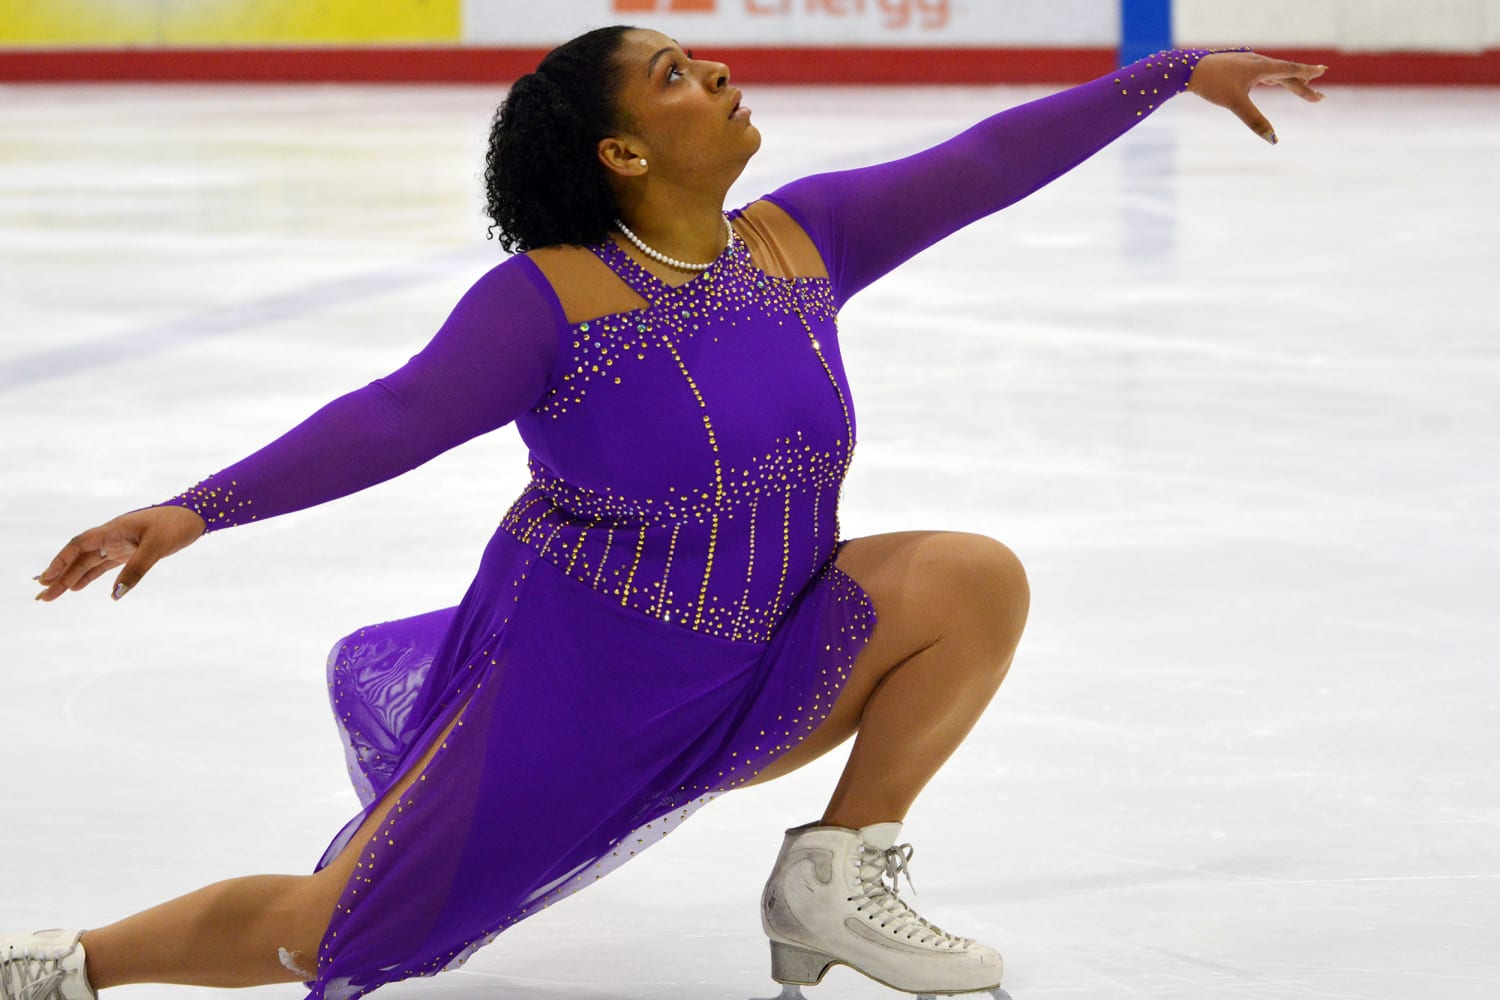 We don't look like them': Black figure skaters face barriers to